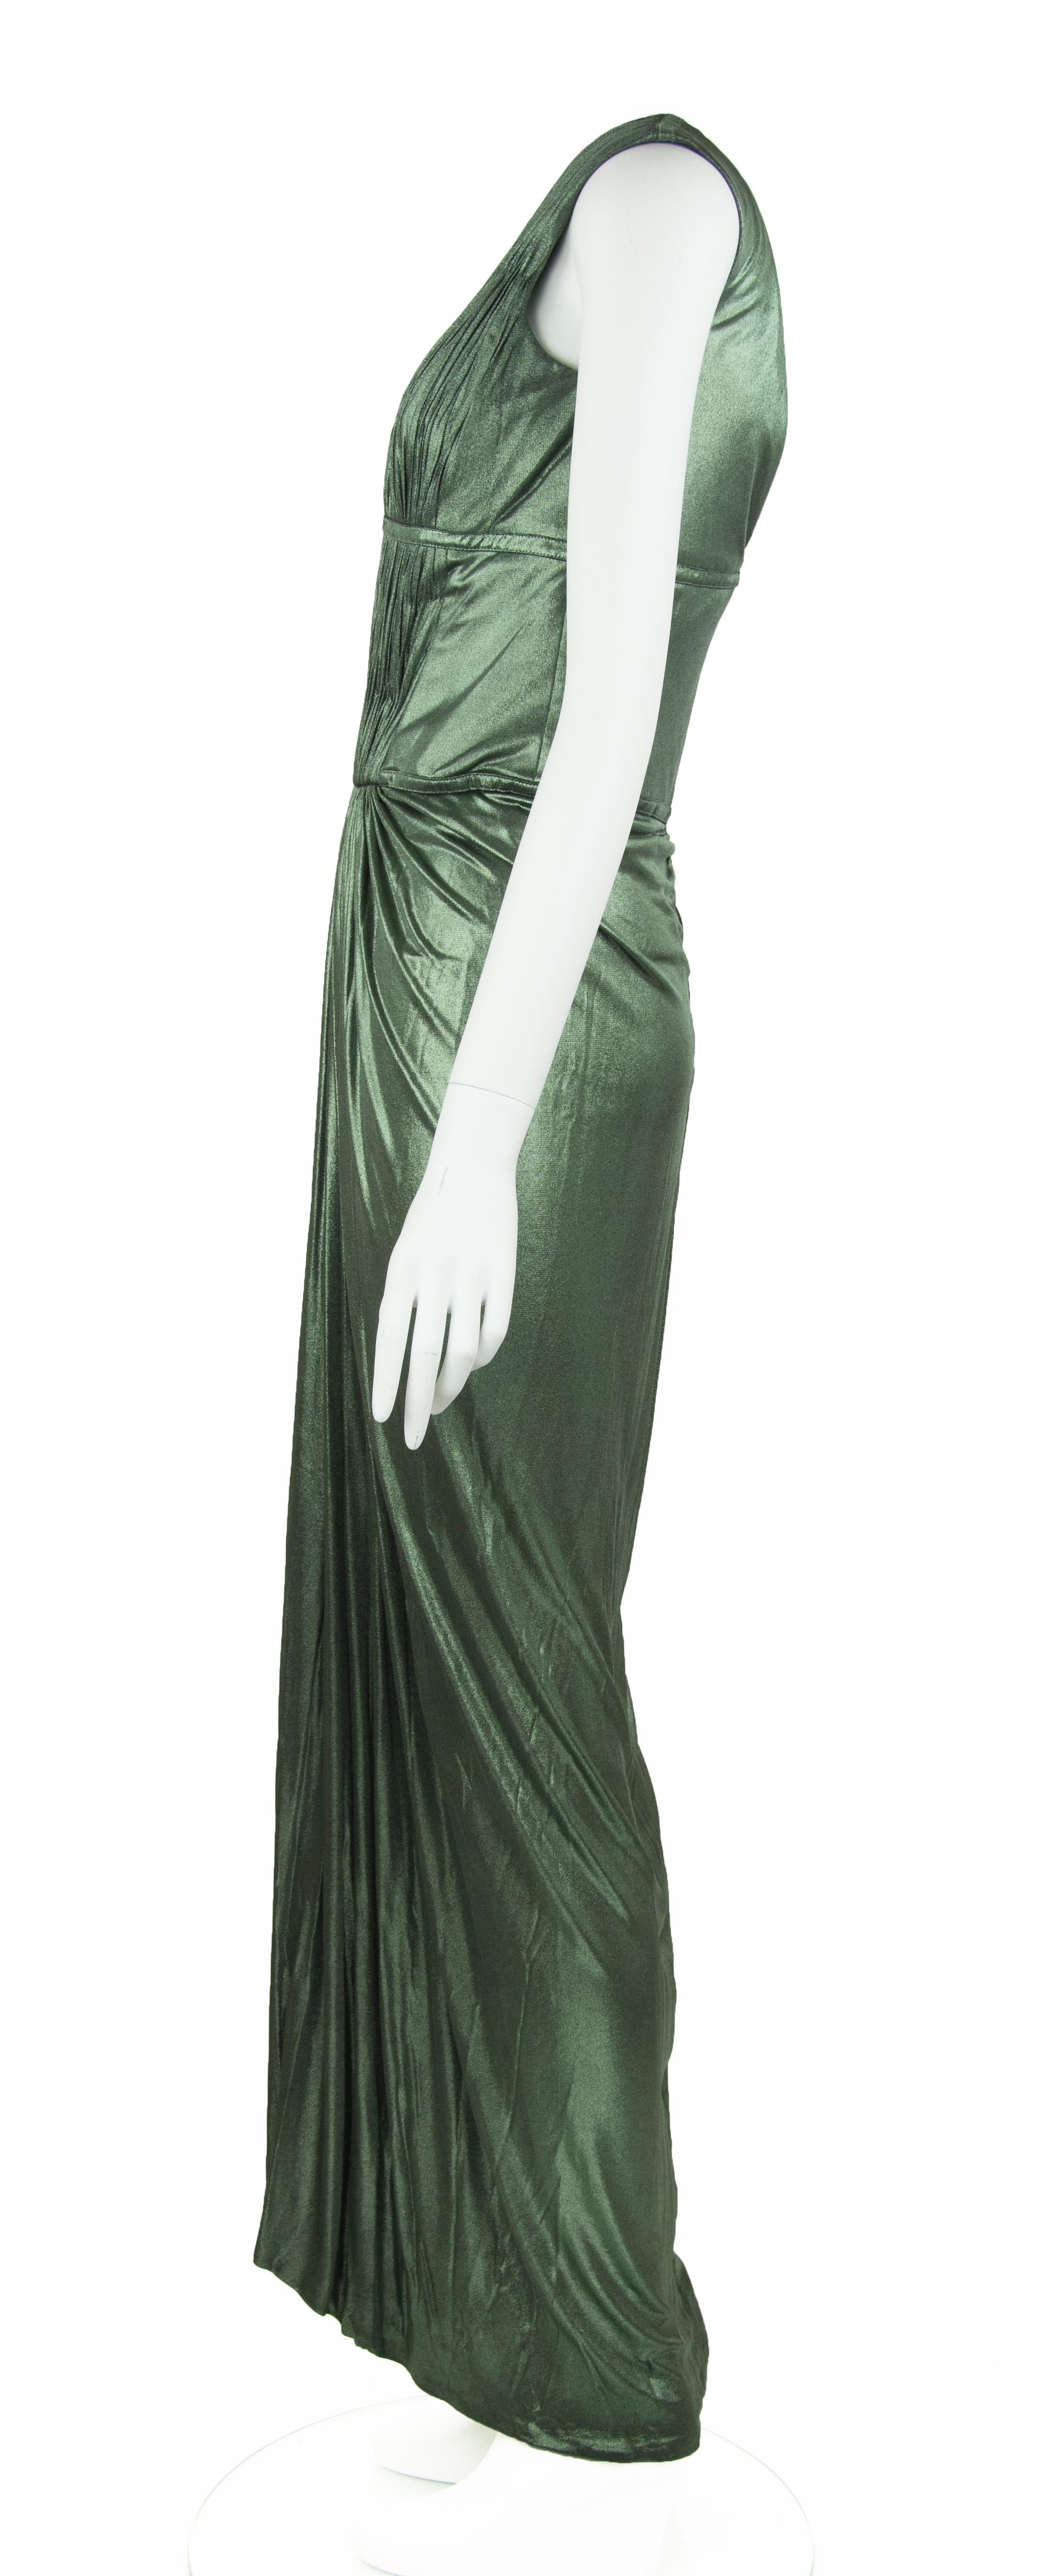 Incredibly sexy, Roberto Cavalli green metallic gown.  Features a very low v neck in the front and back with gathering on the bodice and skirt.  Perfect look for your next black tie event.

Size: IT 40

Condition: Pristine

Composition: 100% cupro /